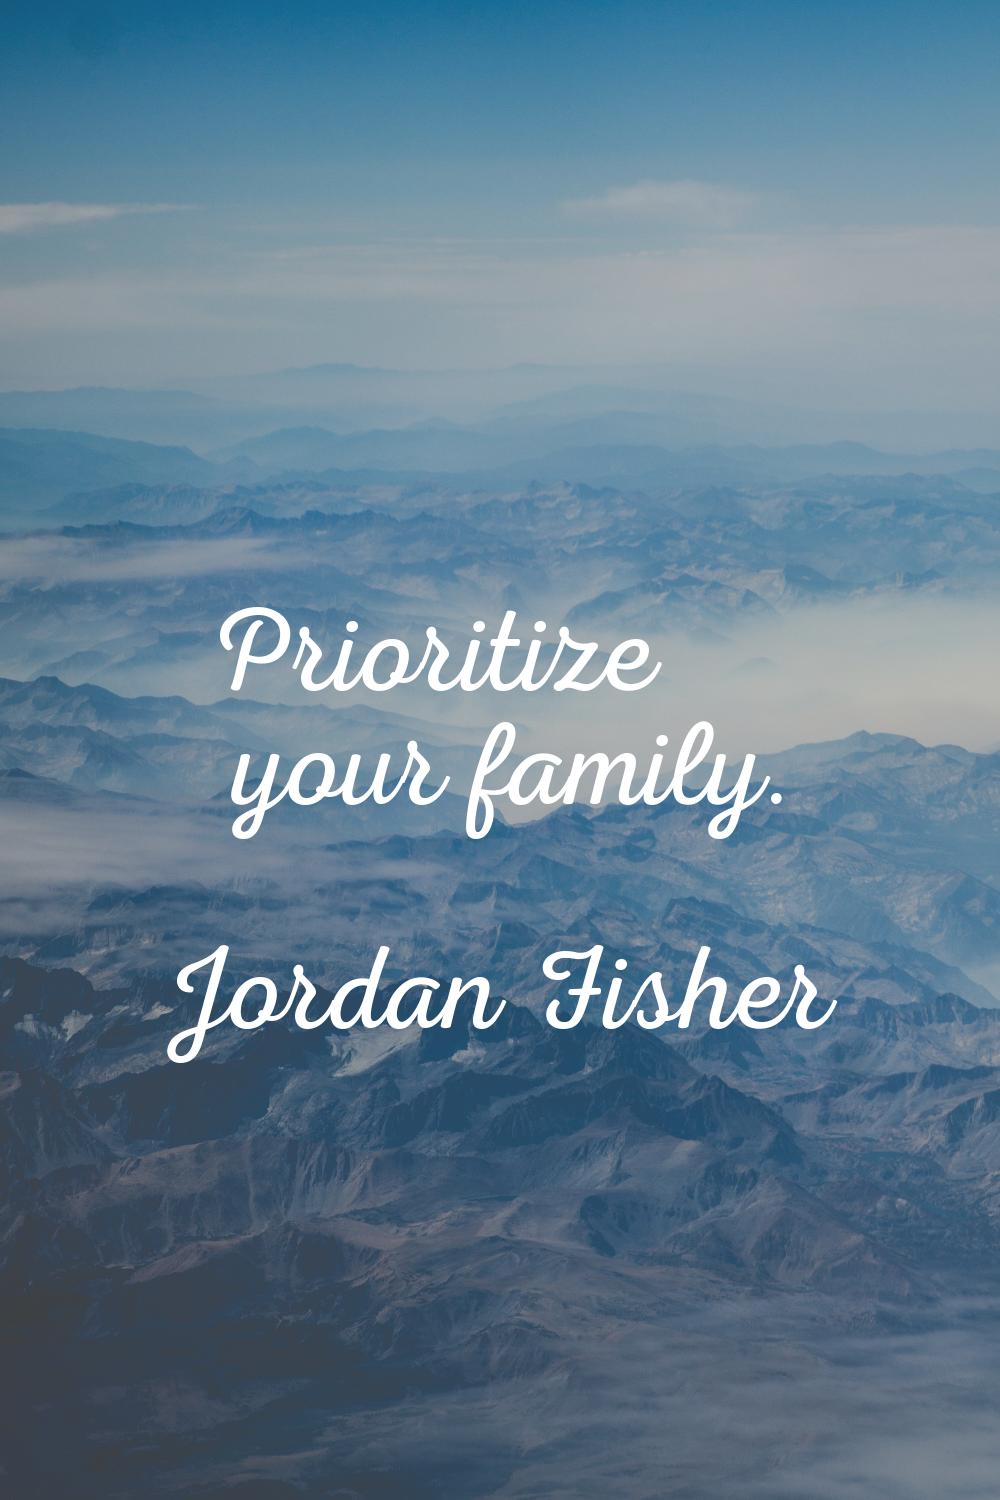 Prioritize your family.